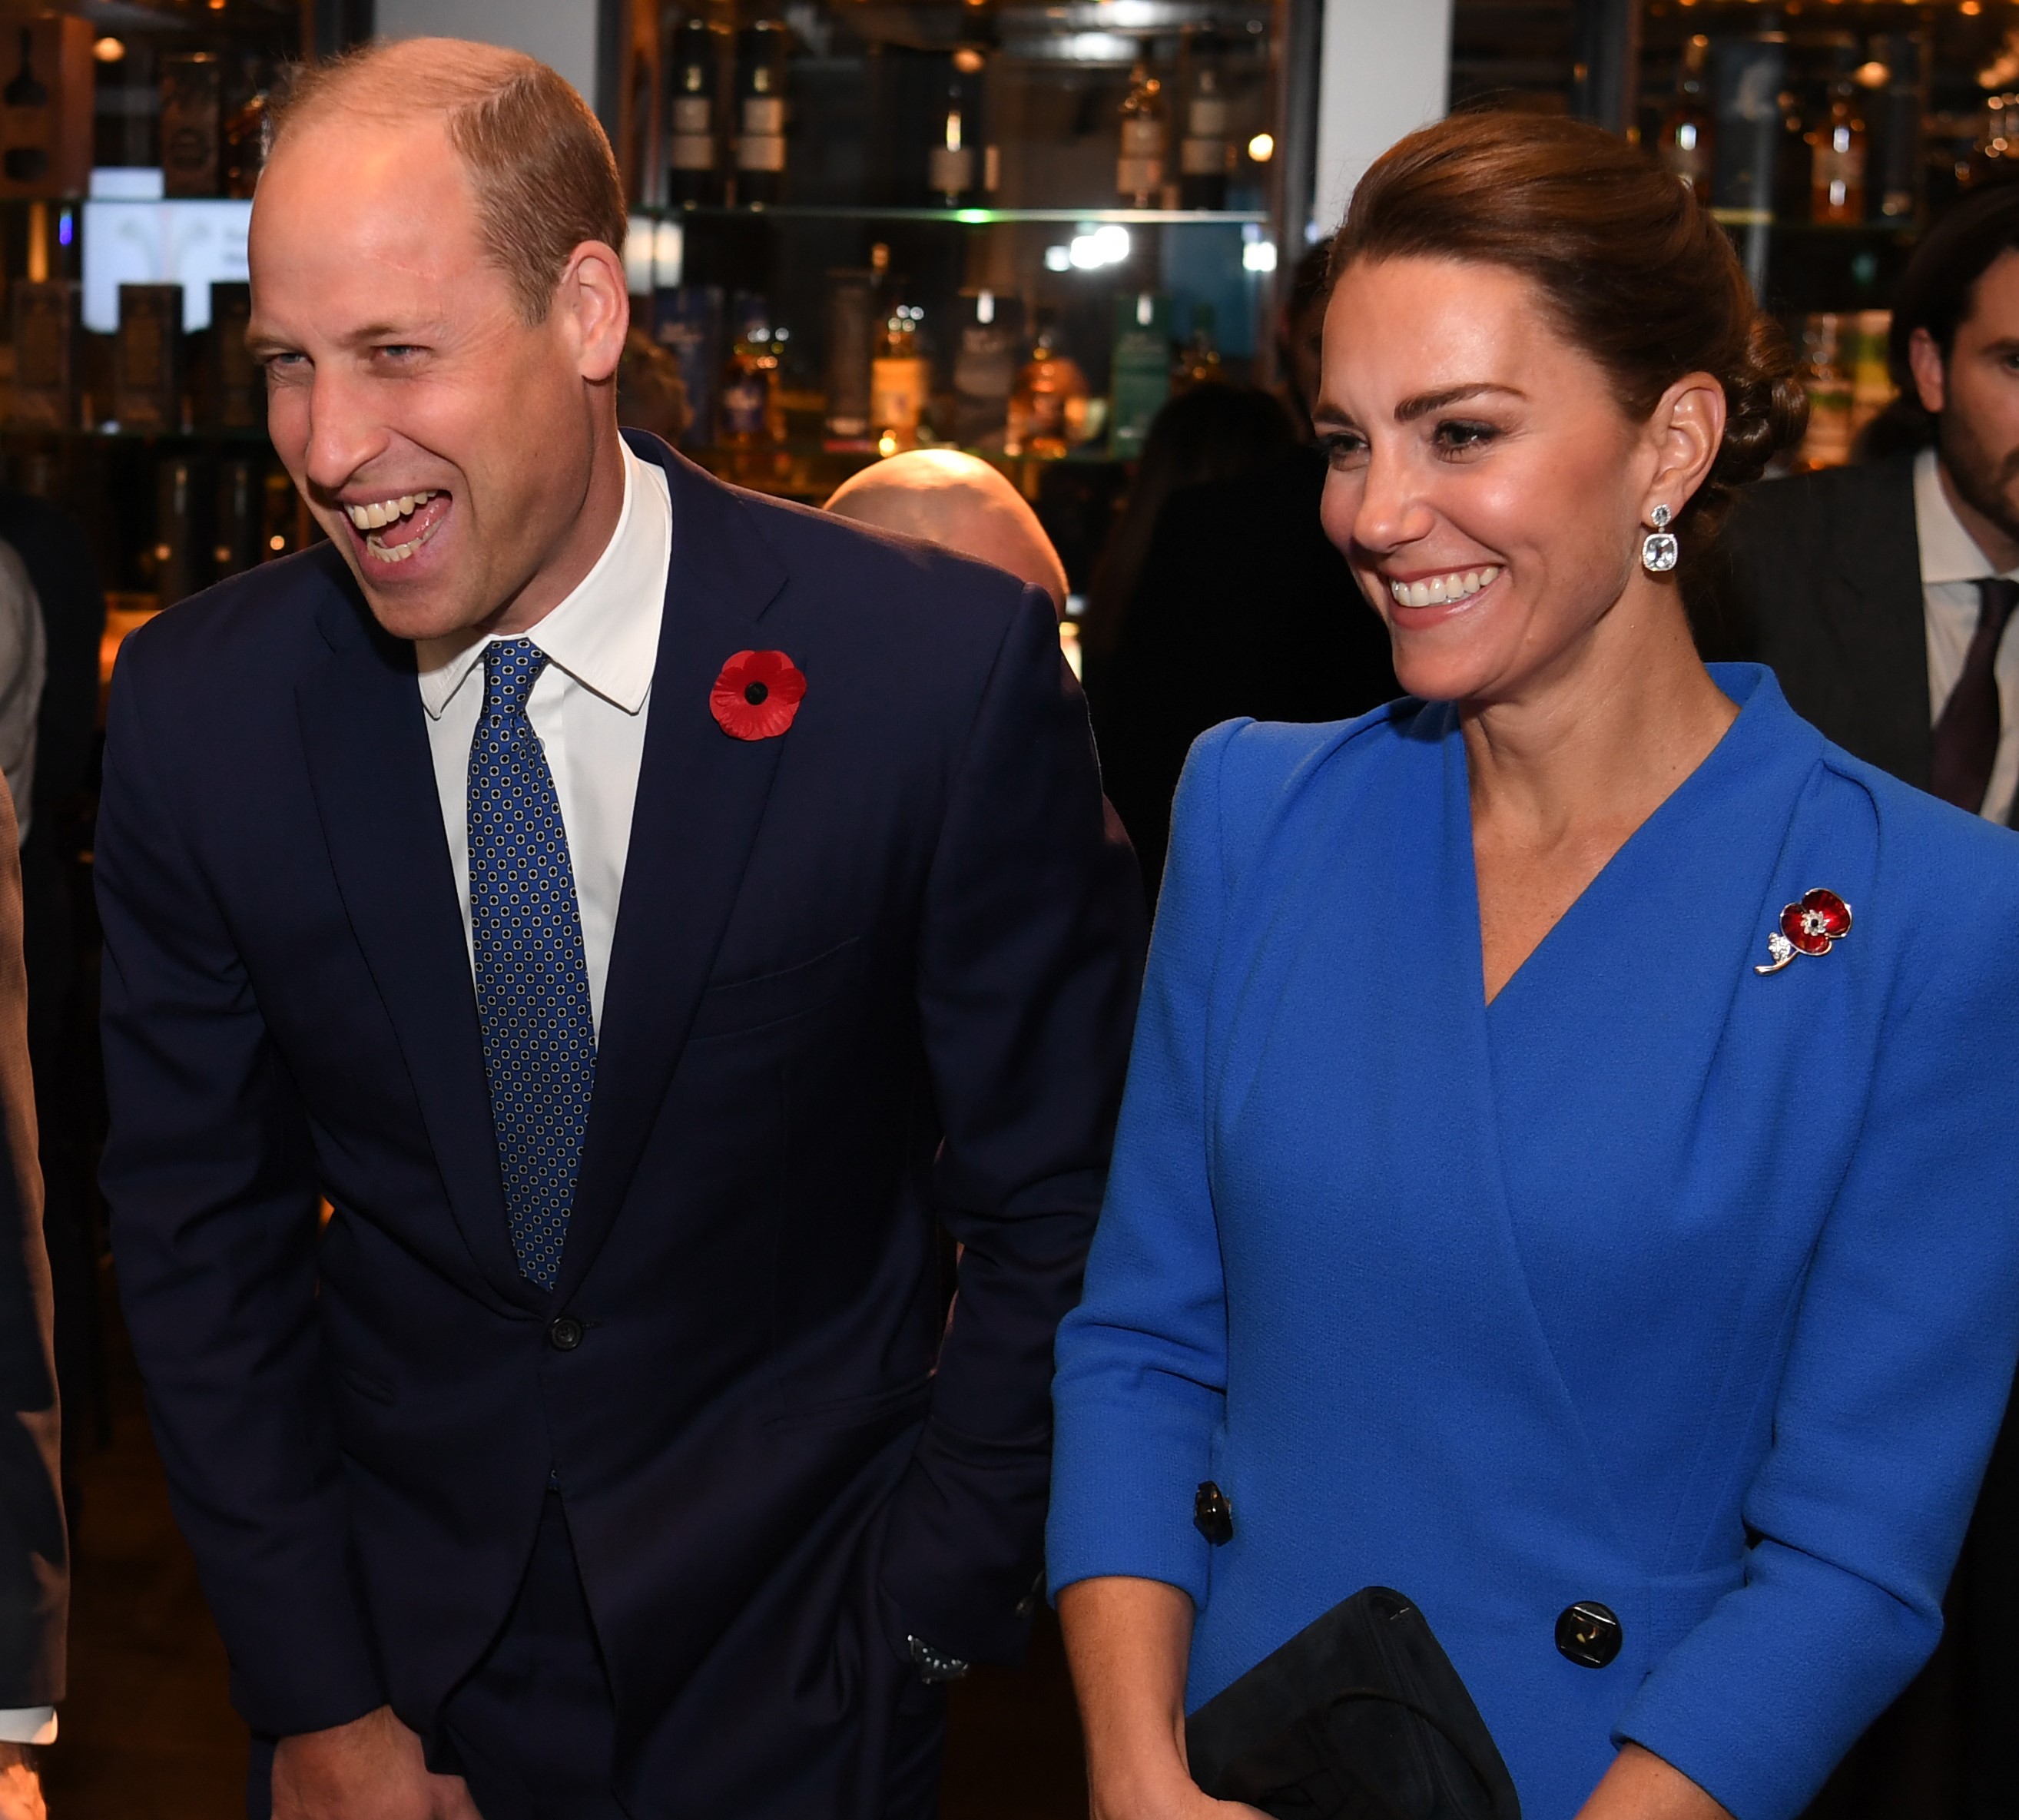 Prince William and Kate Middleton speak with guests at a reception for the Sustainable Markets Initiative and Finalists of the Earthshot Prize Awards